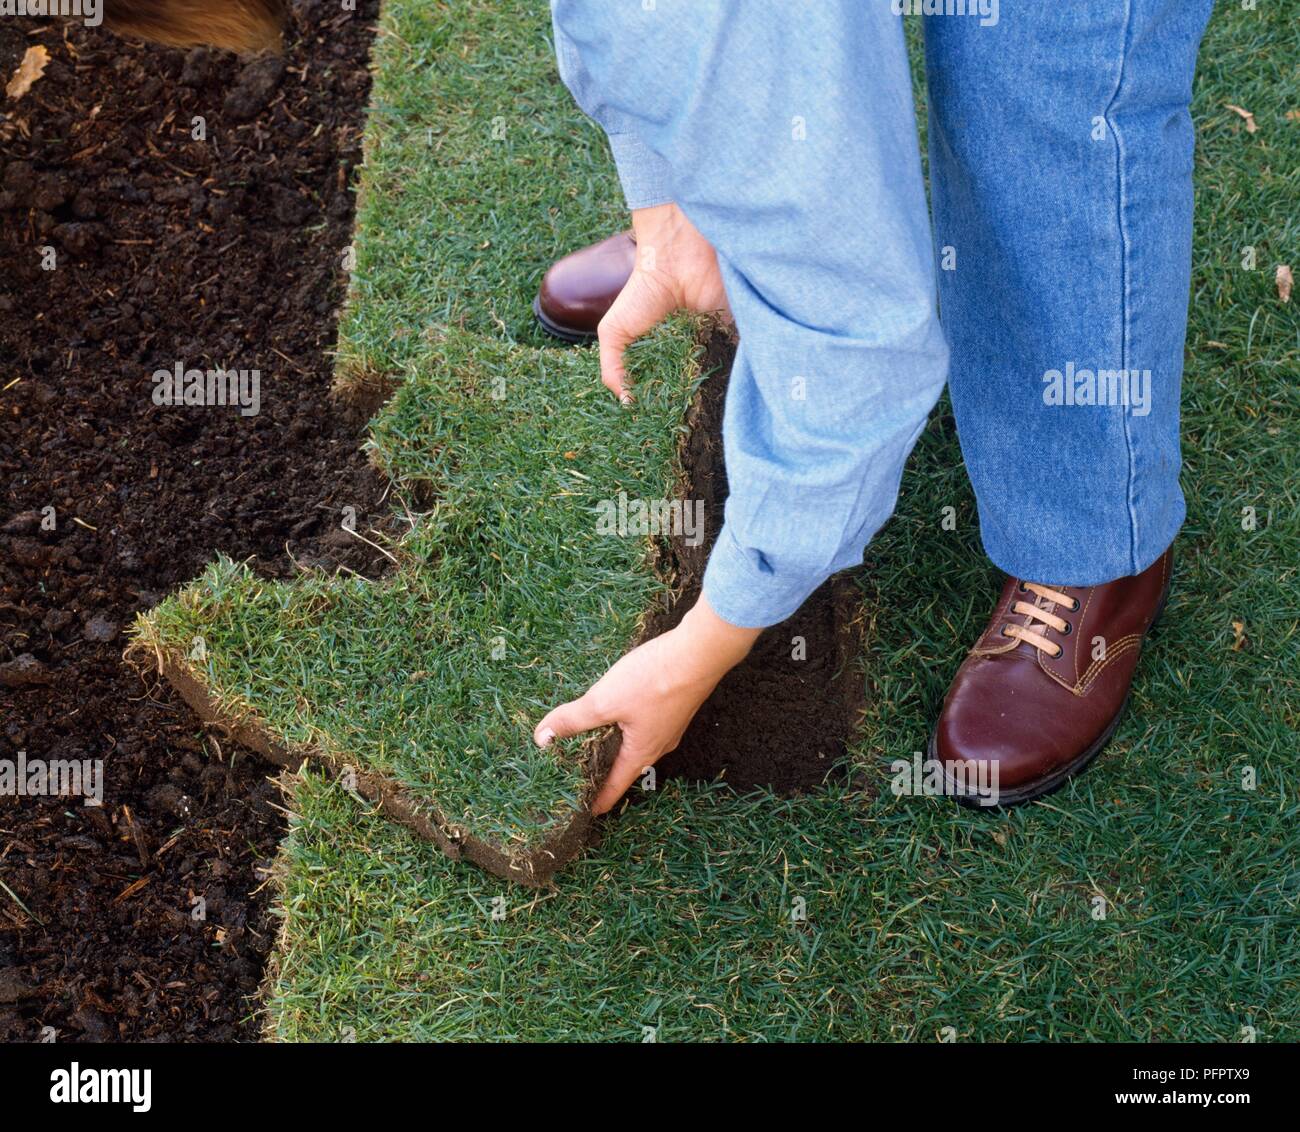 Person inserting piece of turf into hole in lawn Stock Photo